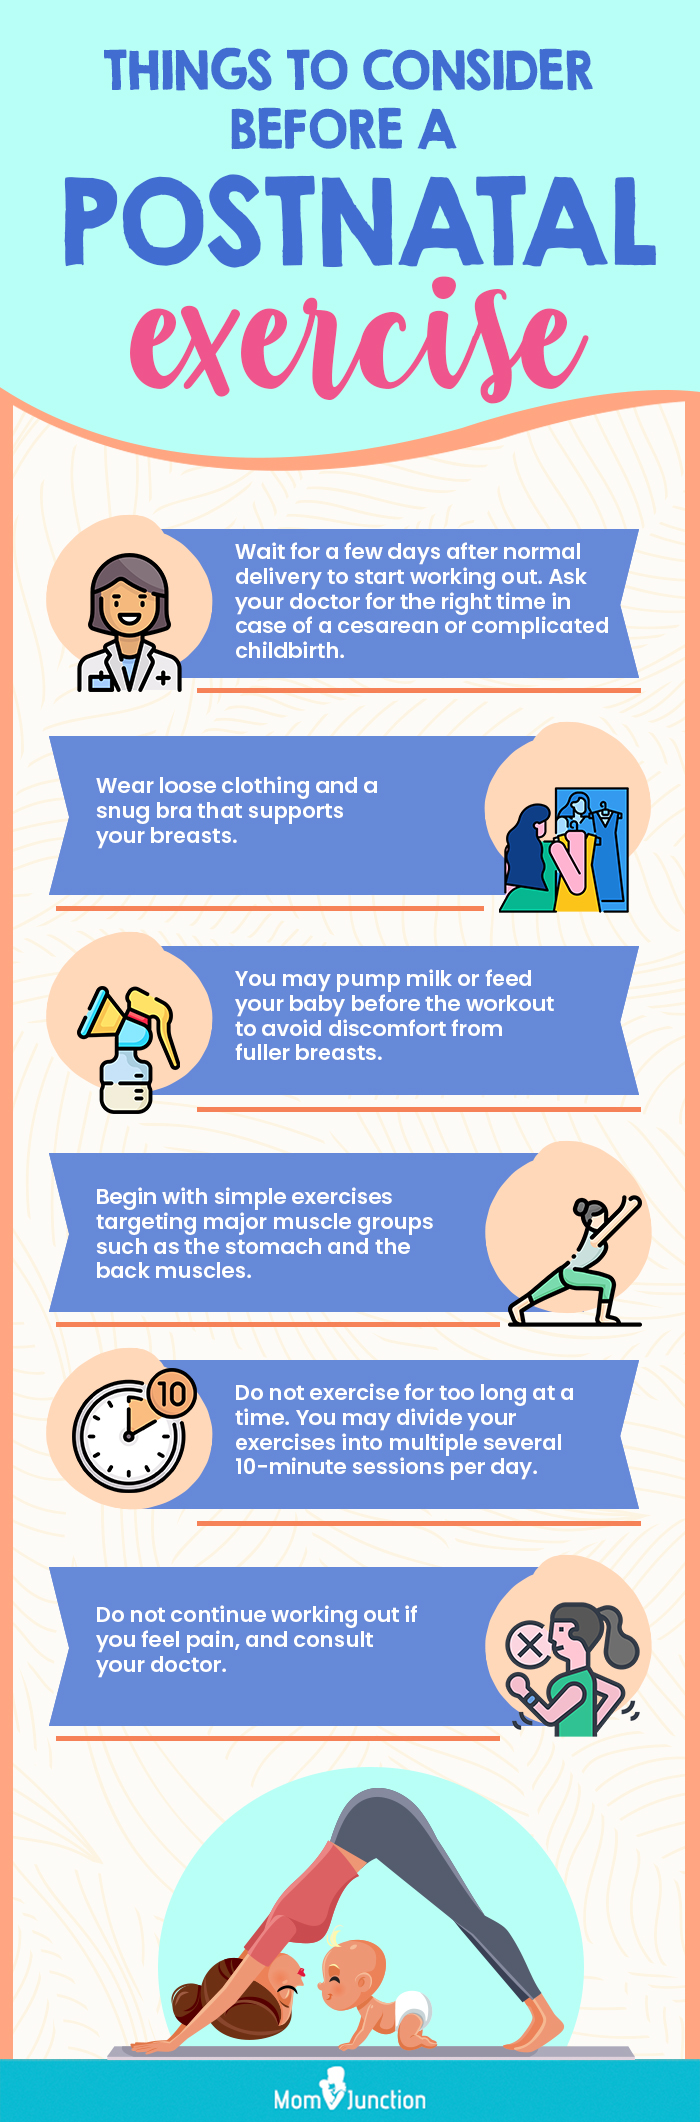 things to consider before a postnatal exercise (infographic)